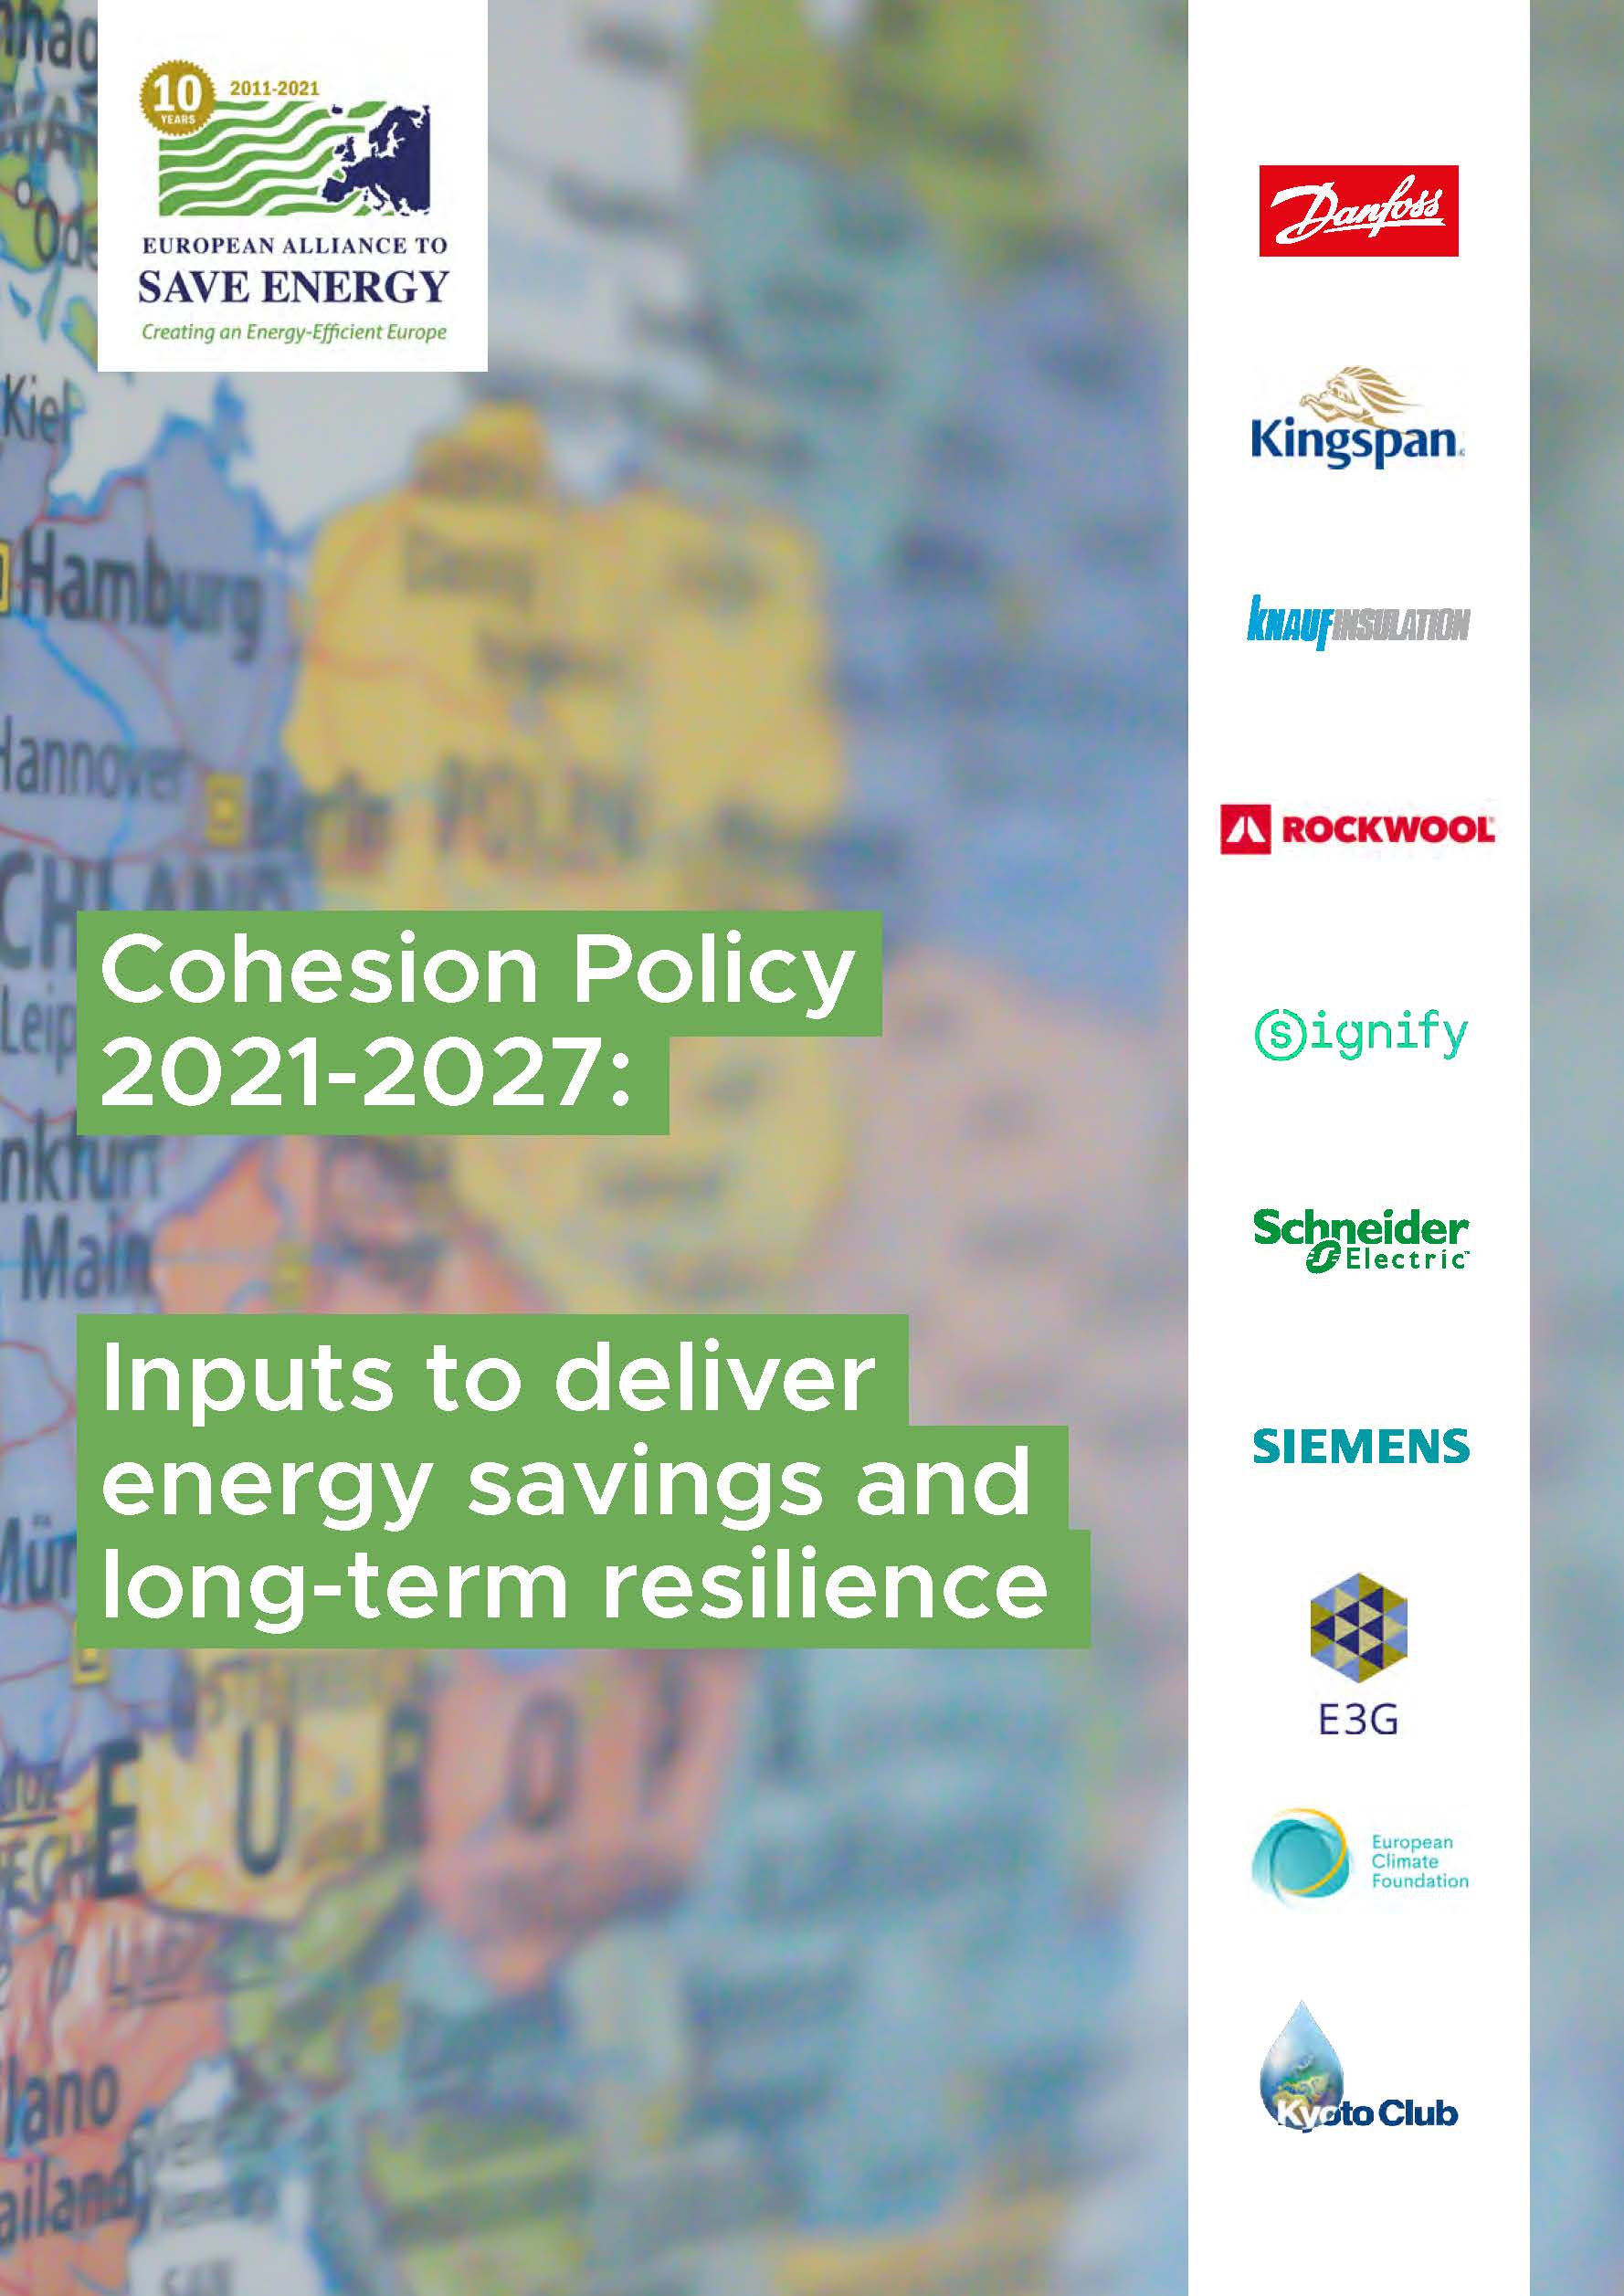 Cohesion Policy: Inputs to deliver energy savings and long-term resilience